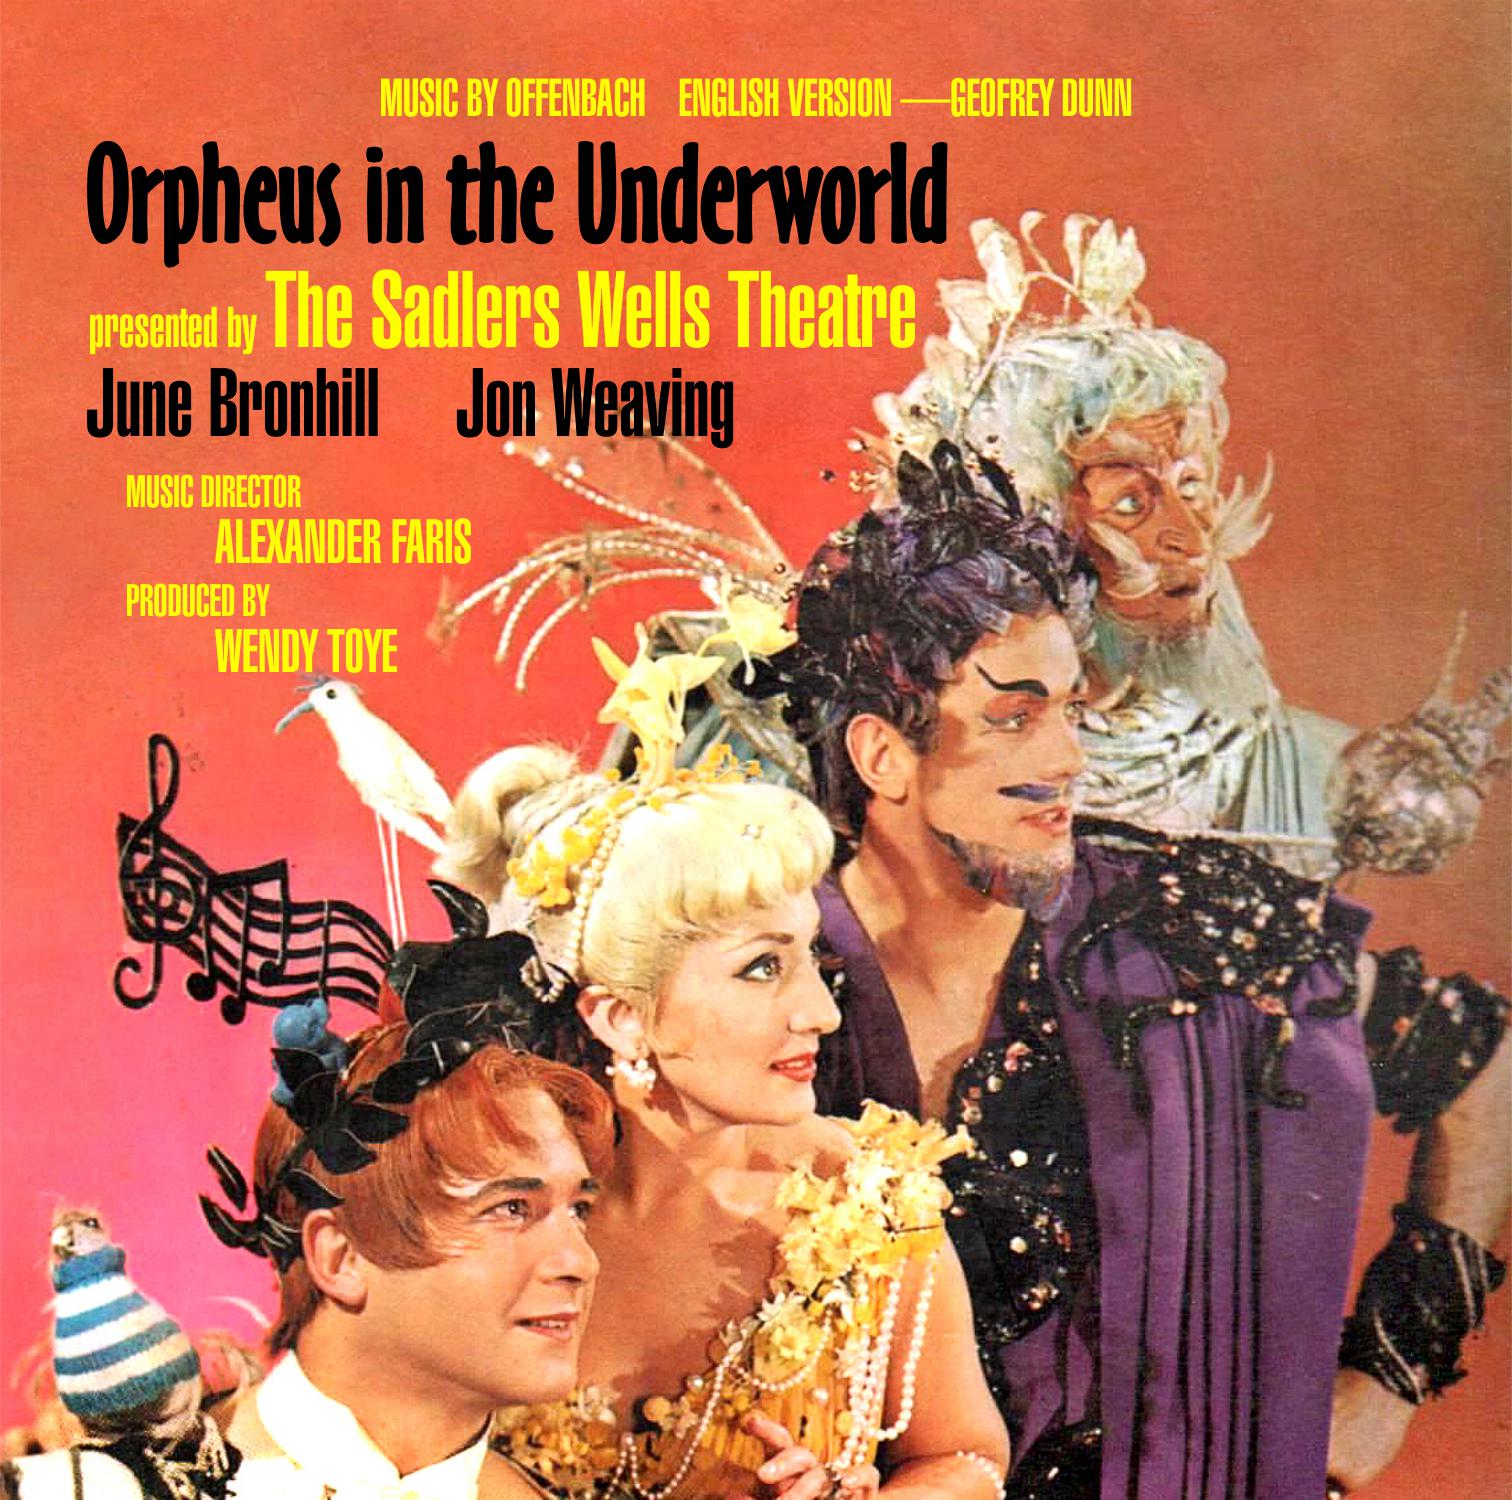 Orpheus in the Underworld Presented by the Sadlers Wells Theatre